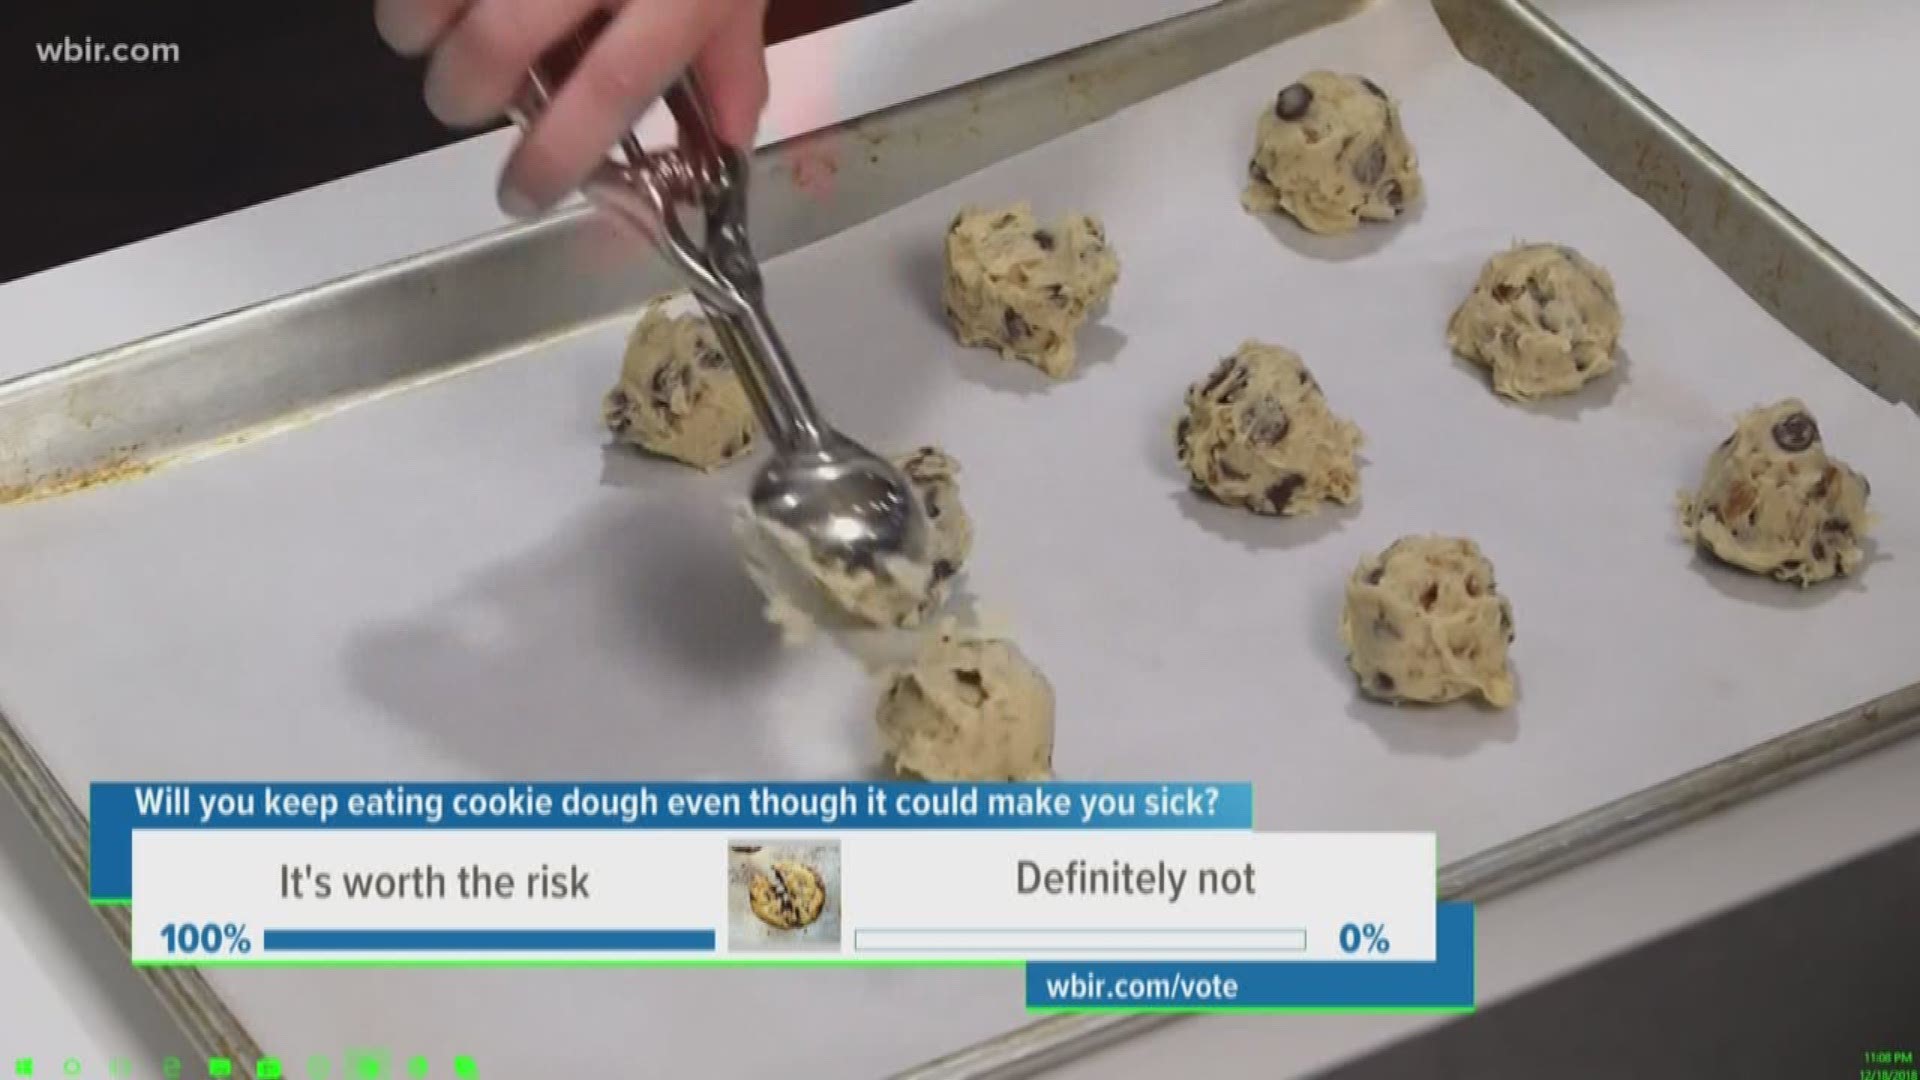 You might want to think twice before sneaking a piece of cookie dough while making cookies for Santa this year.